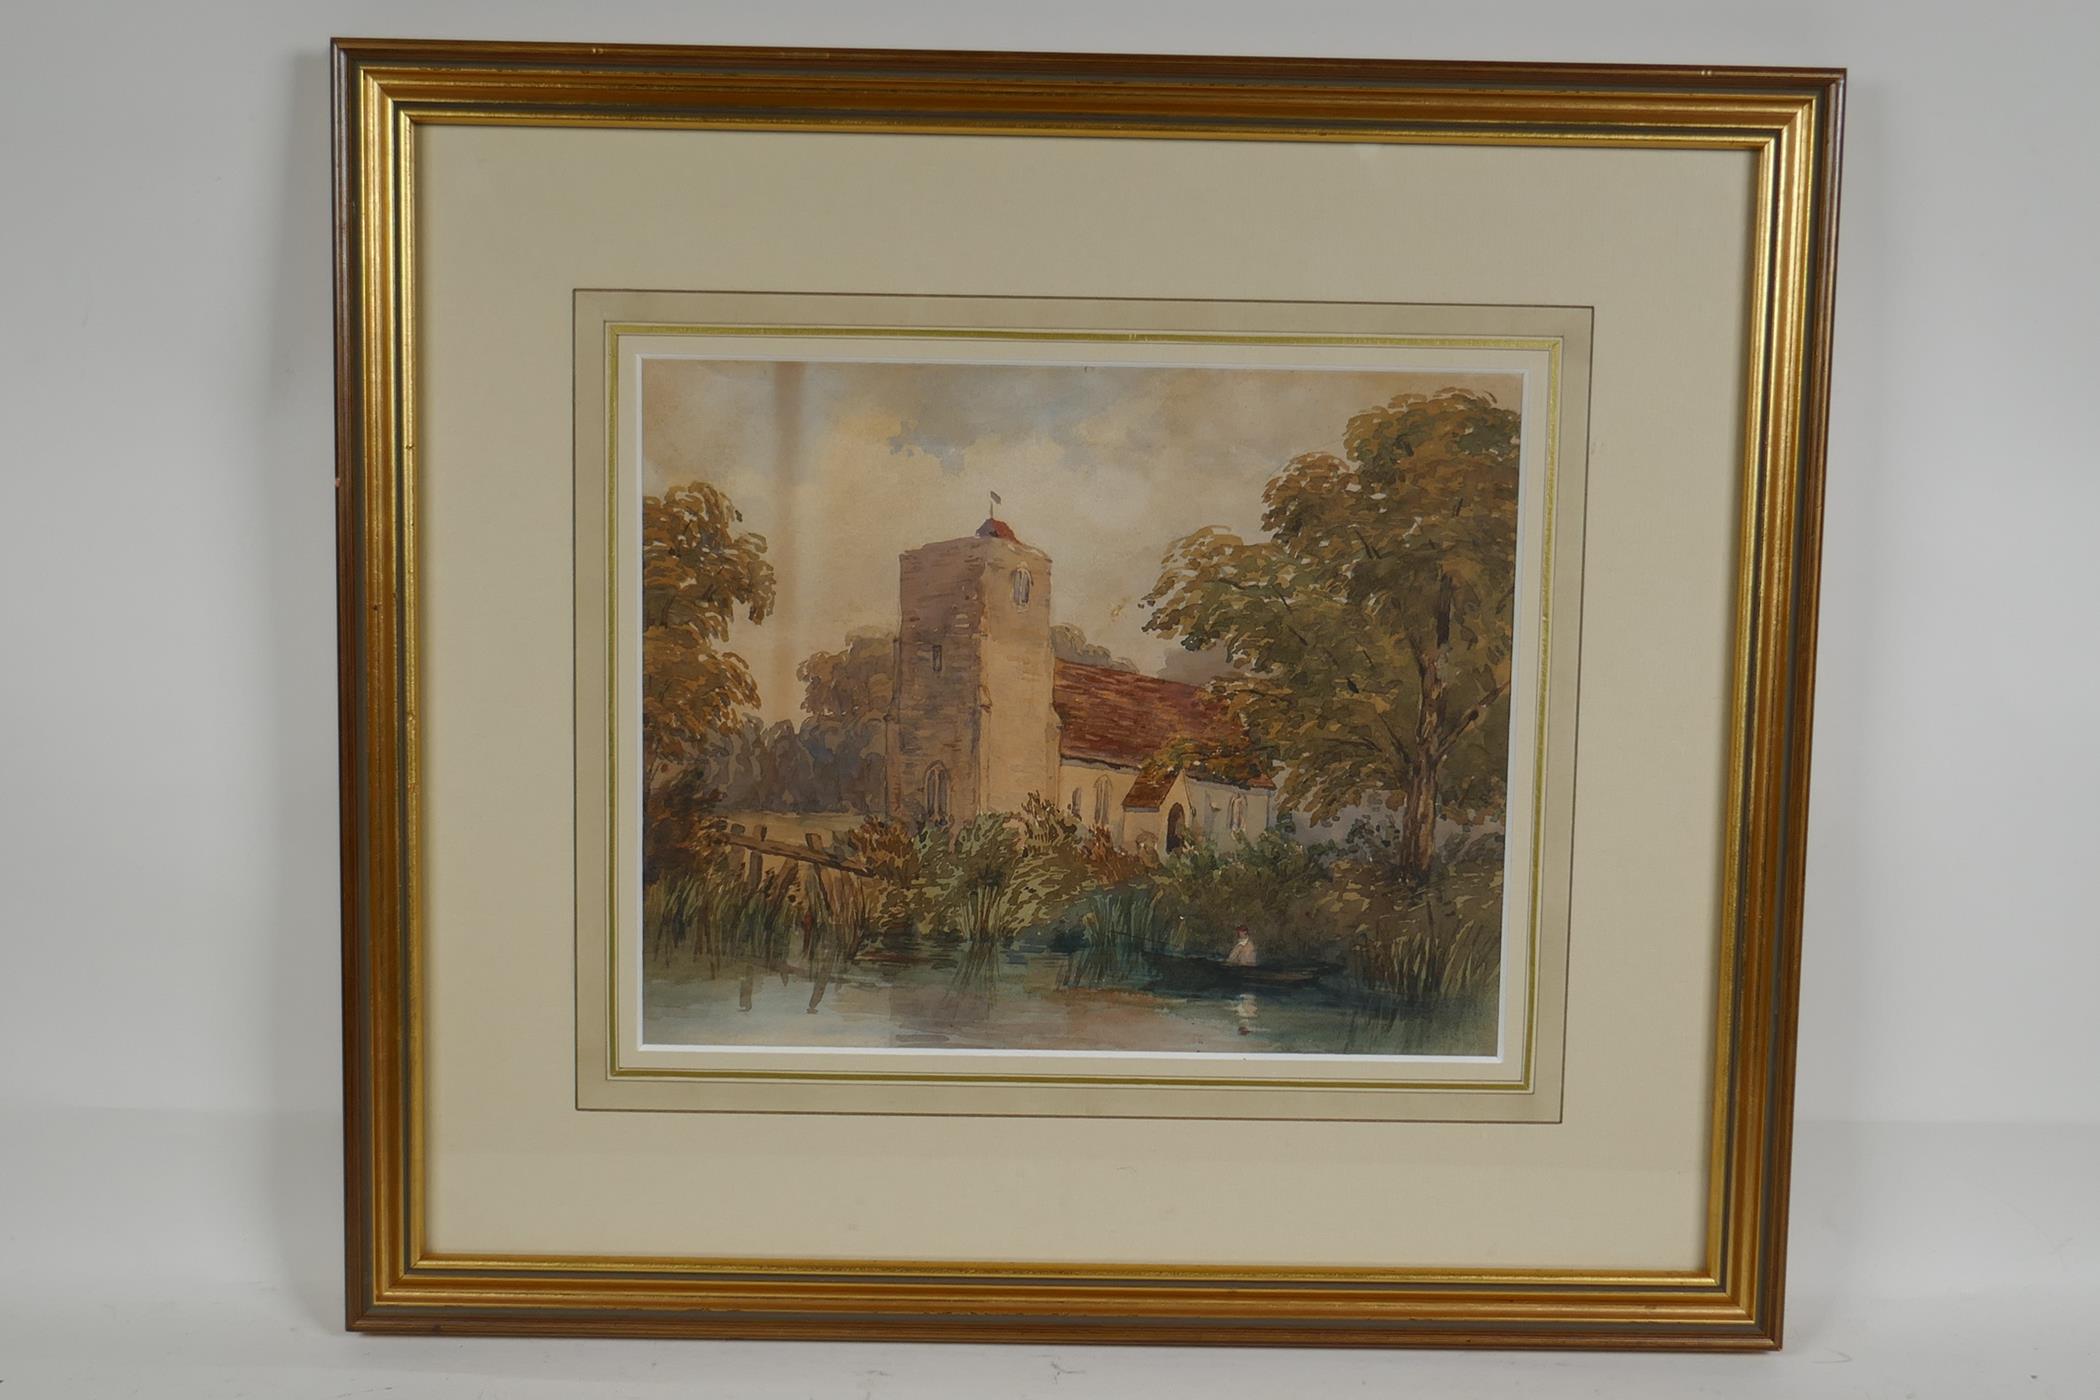 A rural scene with church and pond, C19th watercolour, 10" x 8" - Image 3 of 4